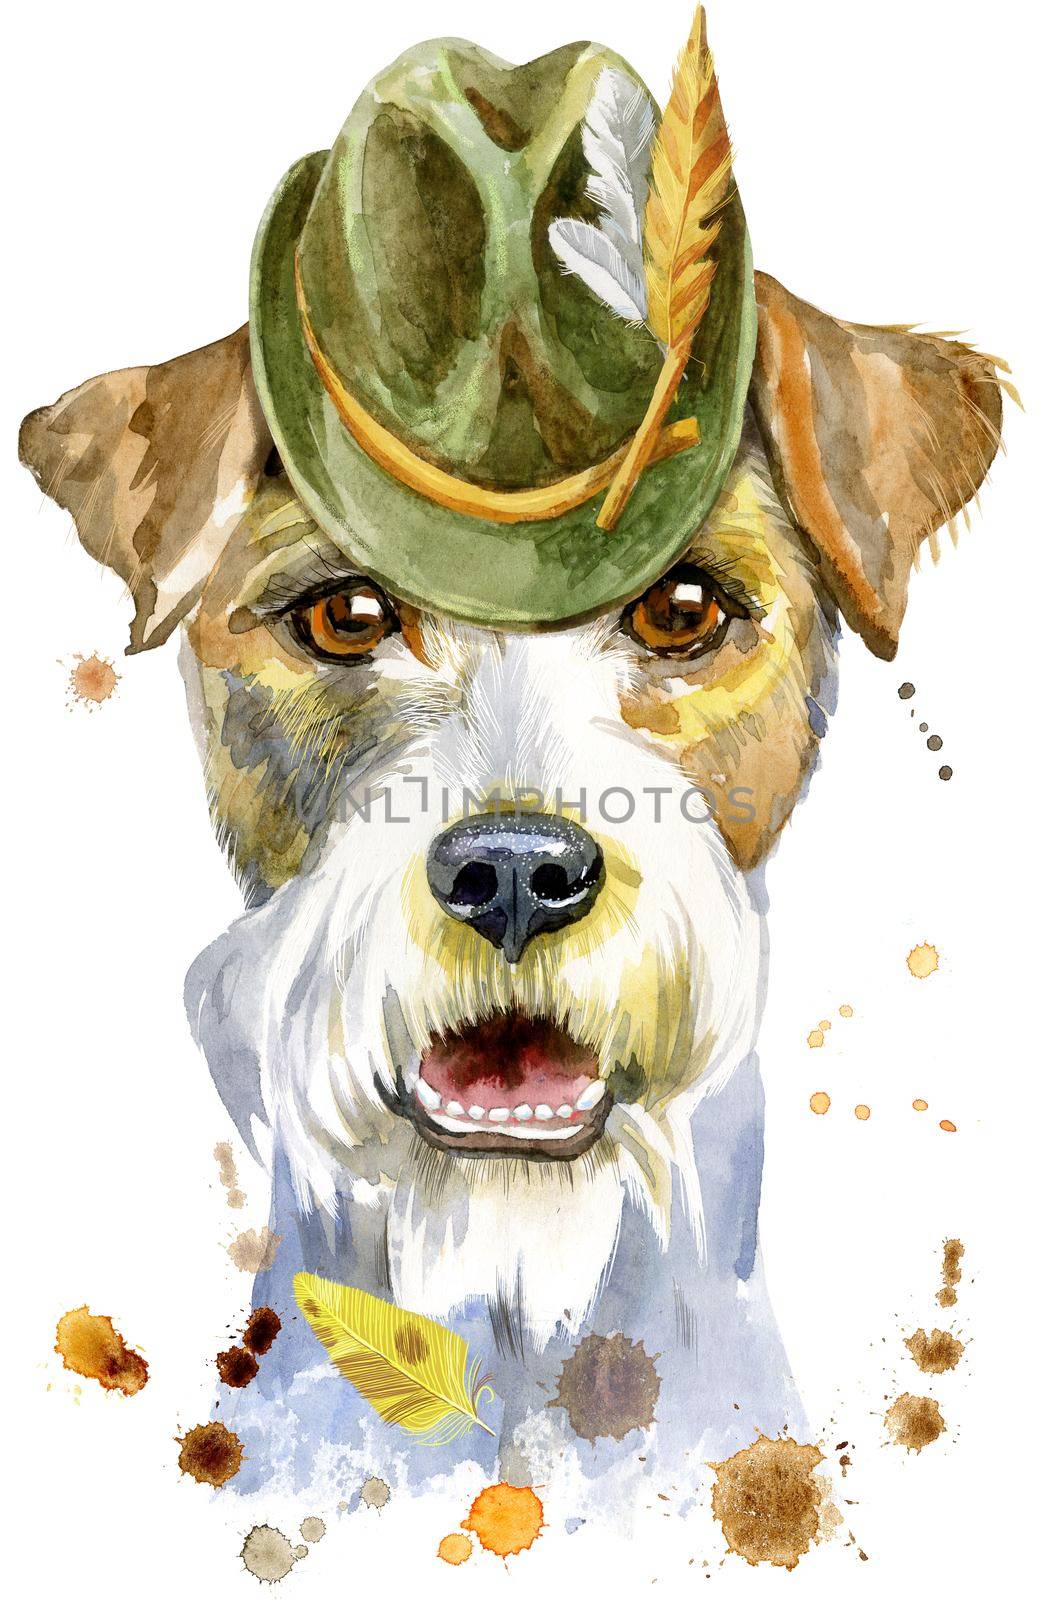 Cute Dog tyrolean hat. Dog T-shirt graphics. watercolor airedale terrier illustration